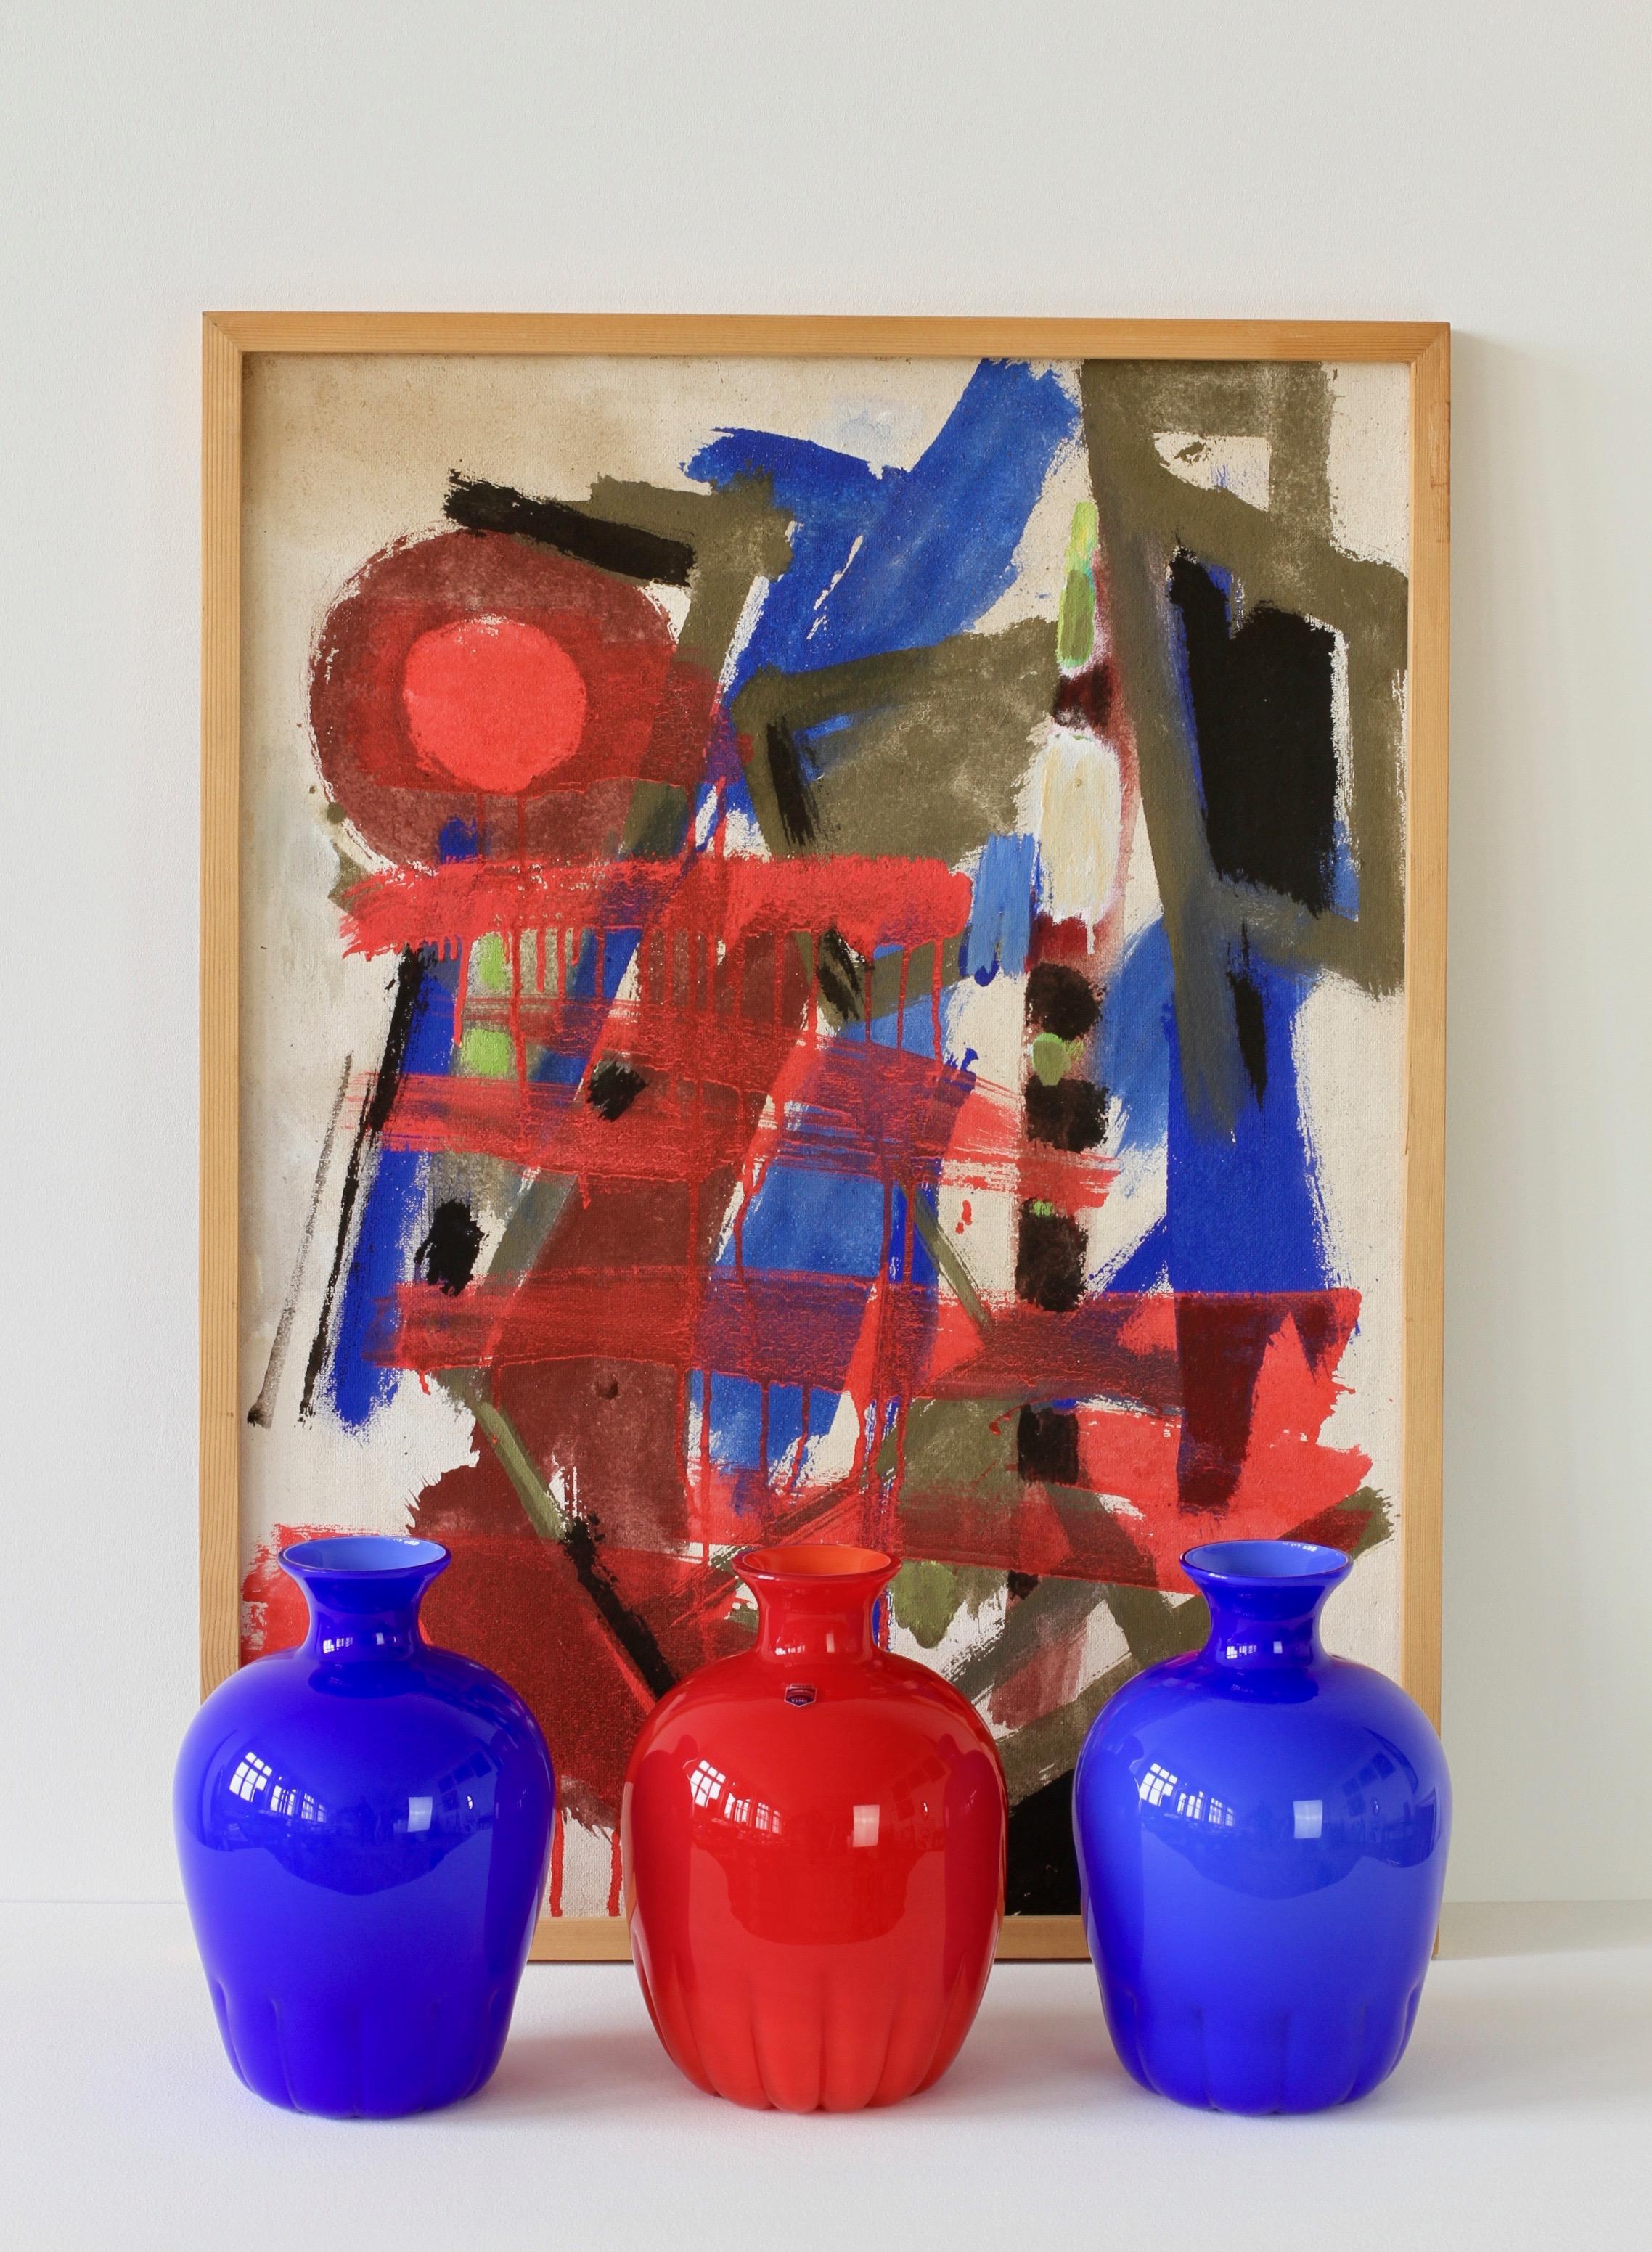 A wonderful set of blue and red Murano glass vases by Cenedese glass, Italy, circa 1990s and an informal abstract modernist oil painting signed by German artist Walter Wohlschlegel (1907-1999). Painted on hardboard, Wohlschlegel is painting on the